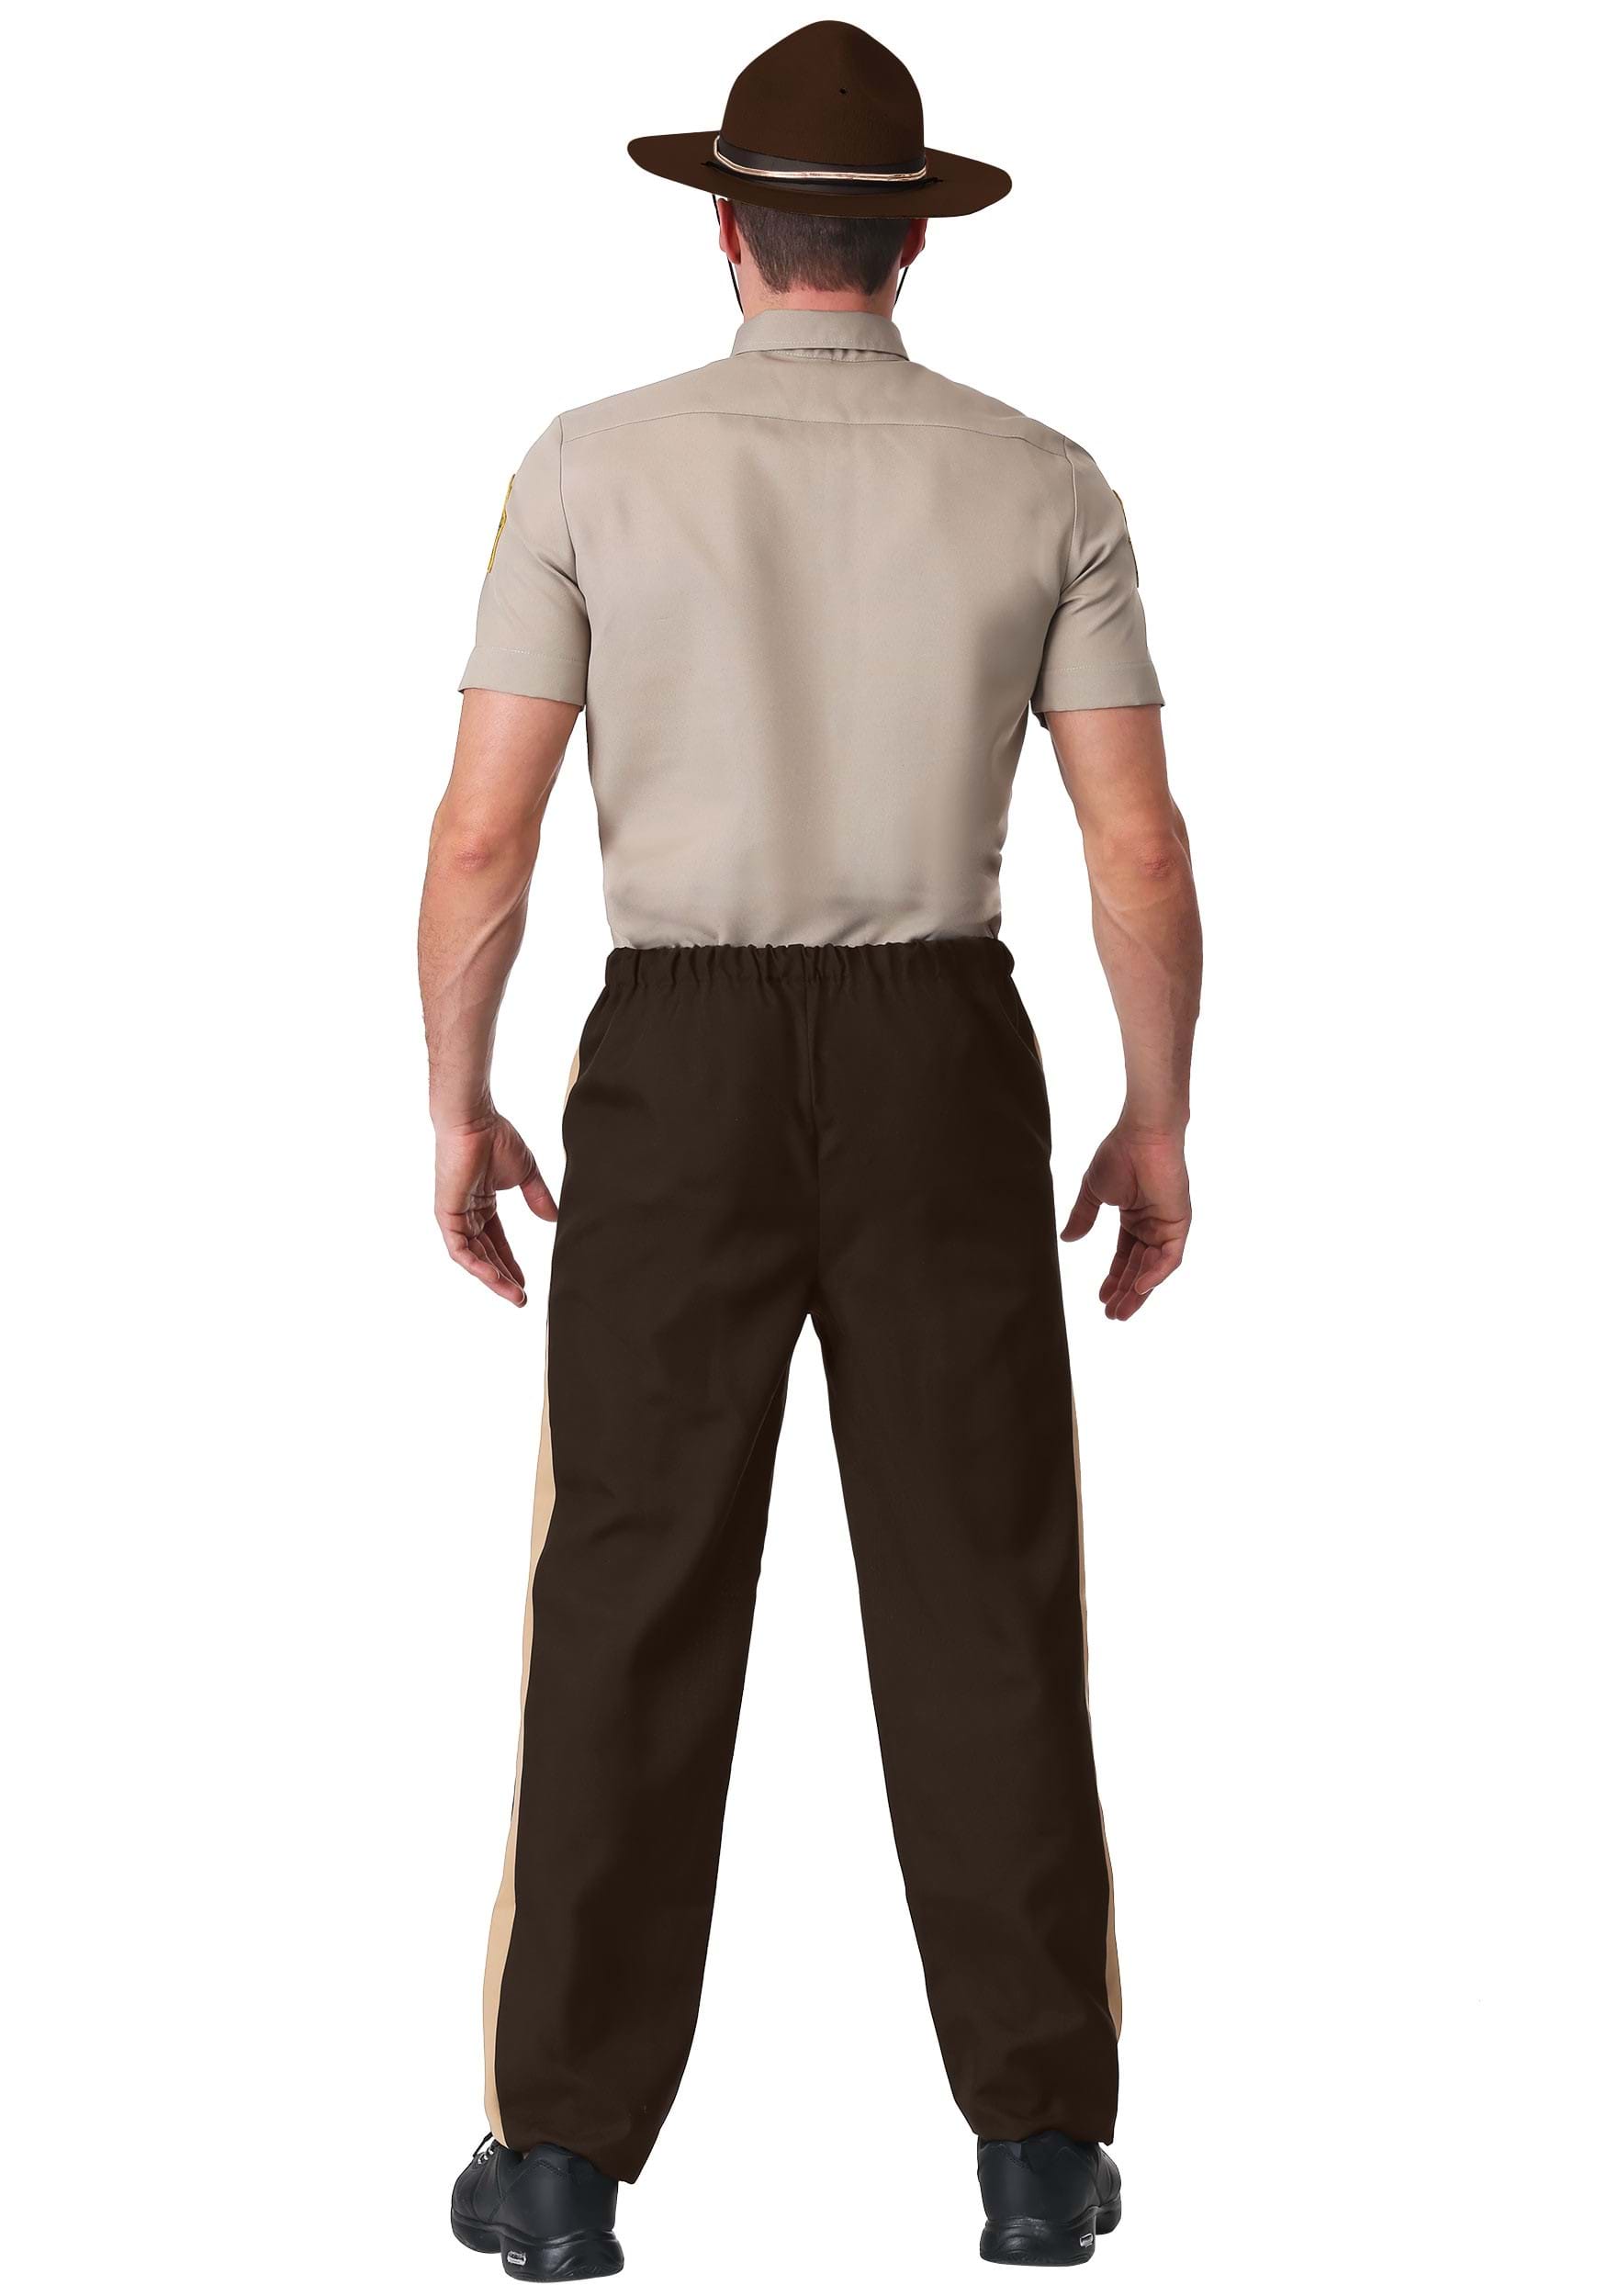 Plus Size Super Troopers State Trooper Costume for Adults